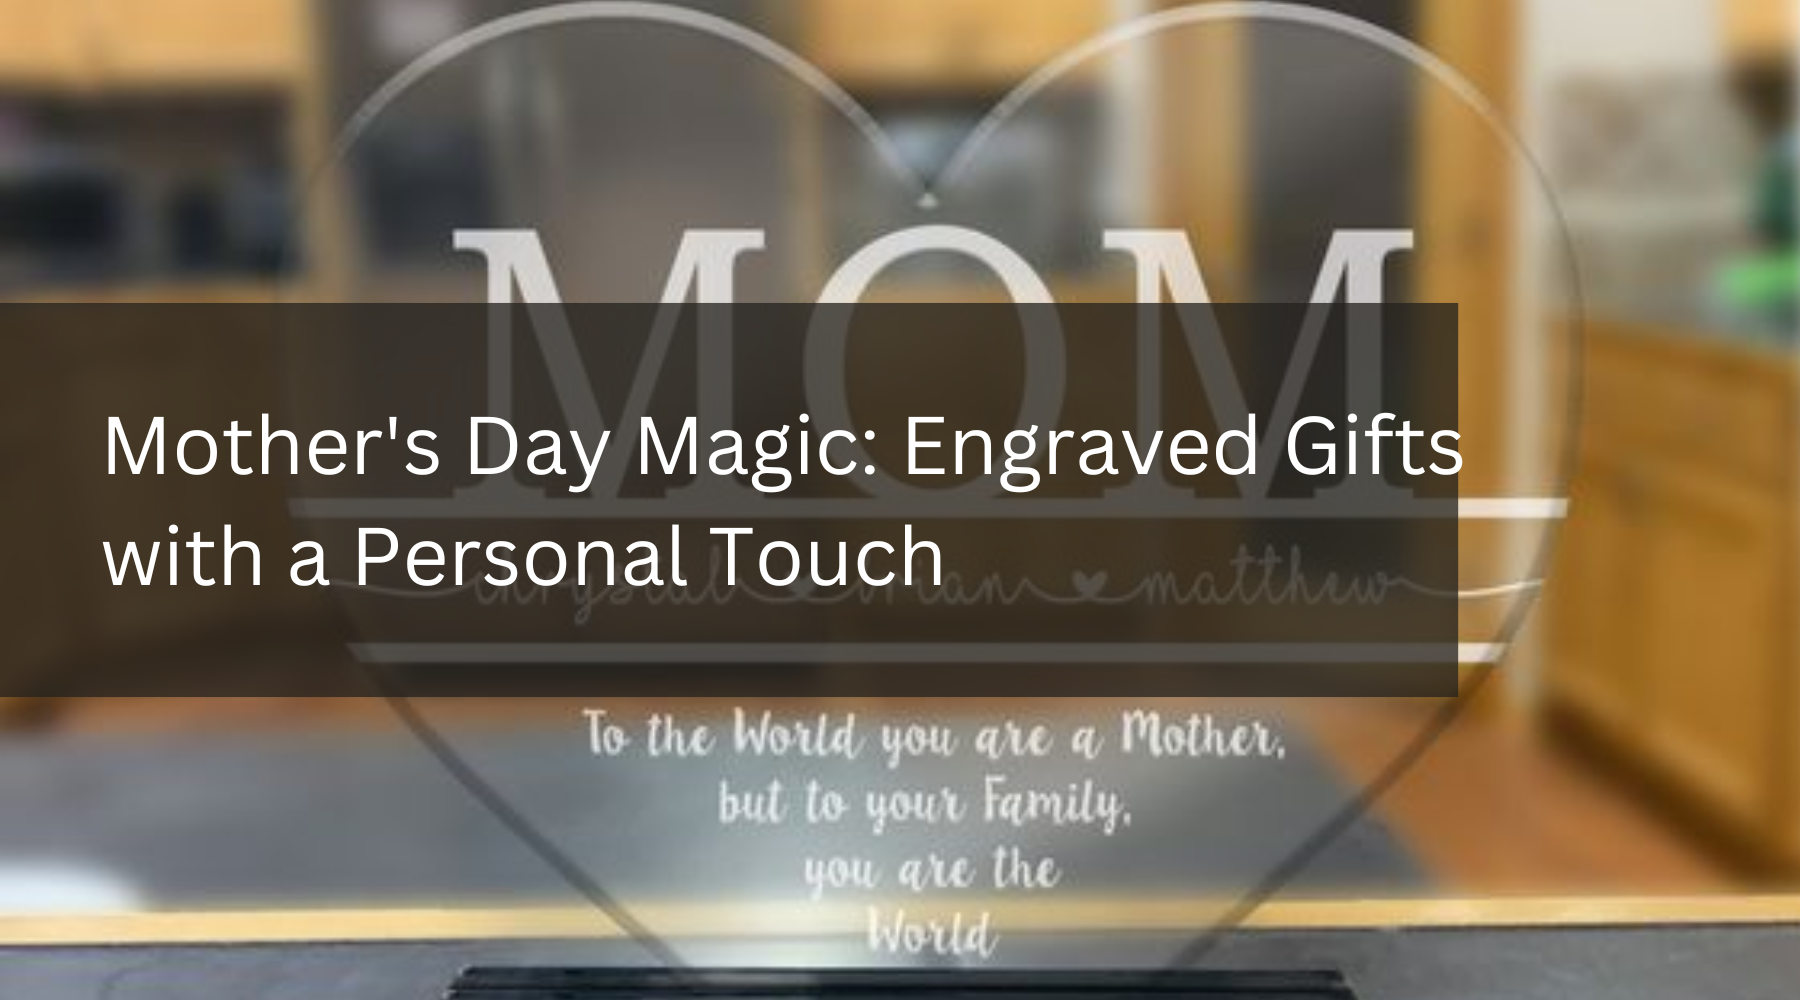 Mother's Day Magic: Engraved Gifts with a Personal Touch